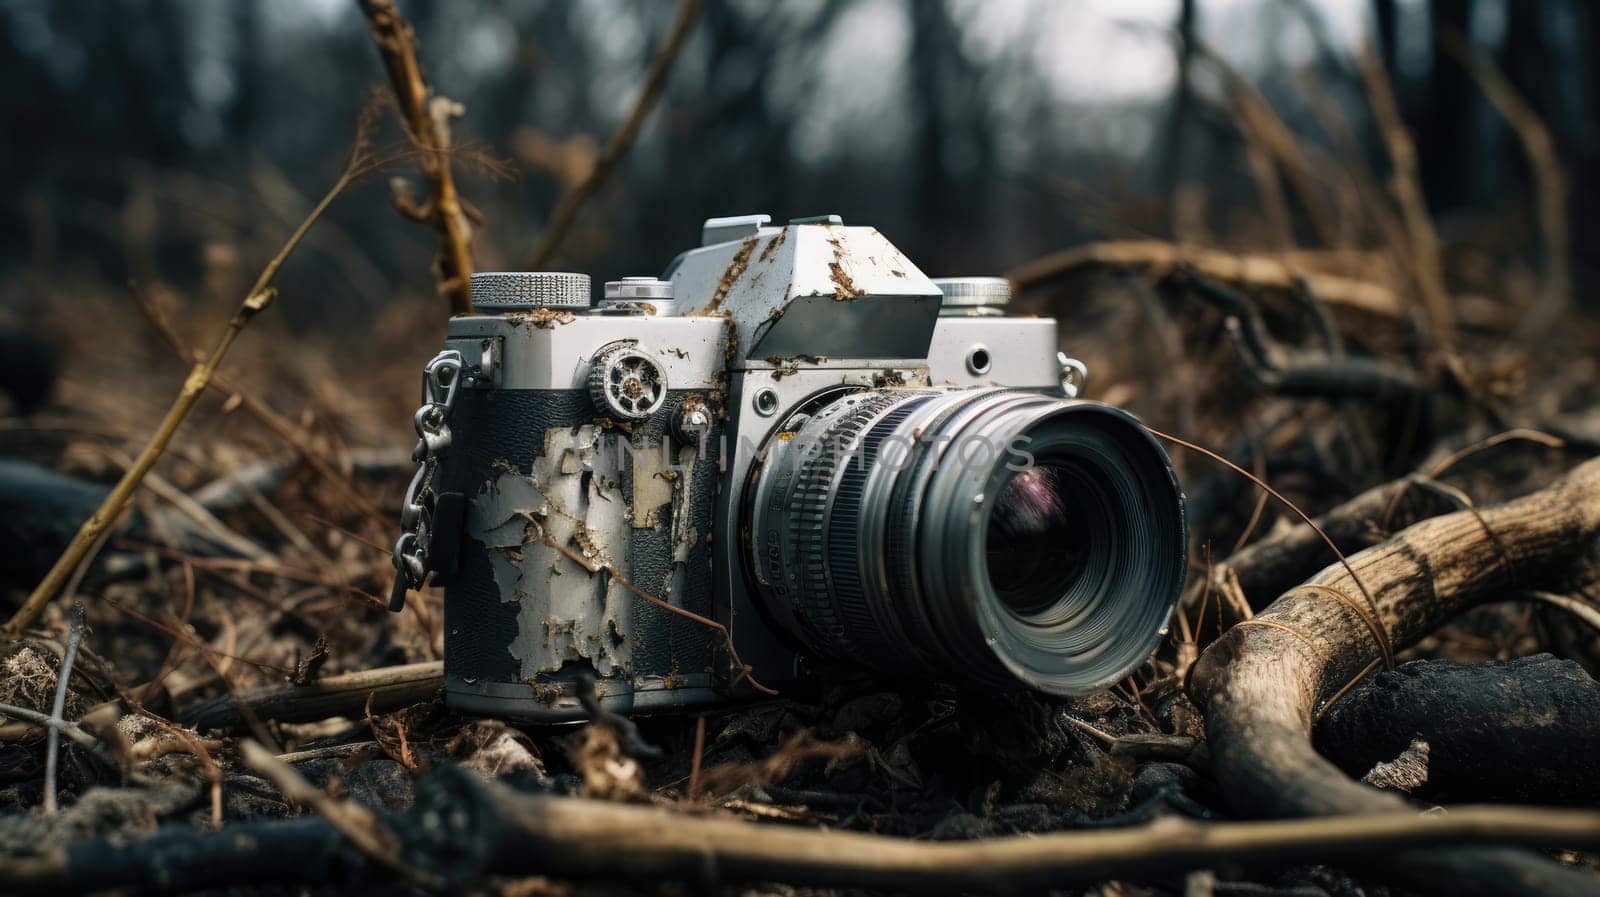 Old rusty camera lost in the jungle forest by natali_brill